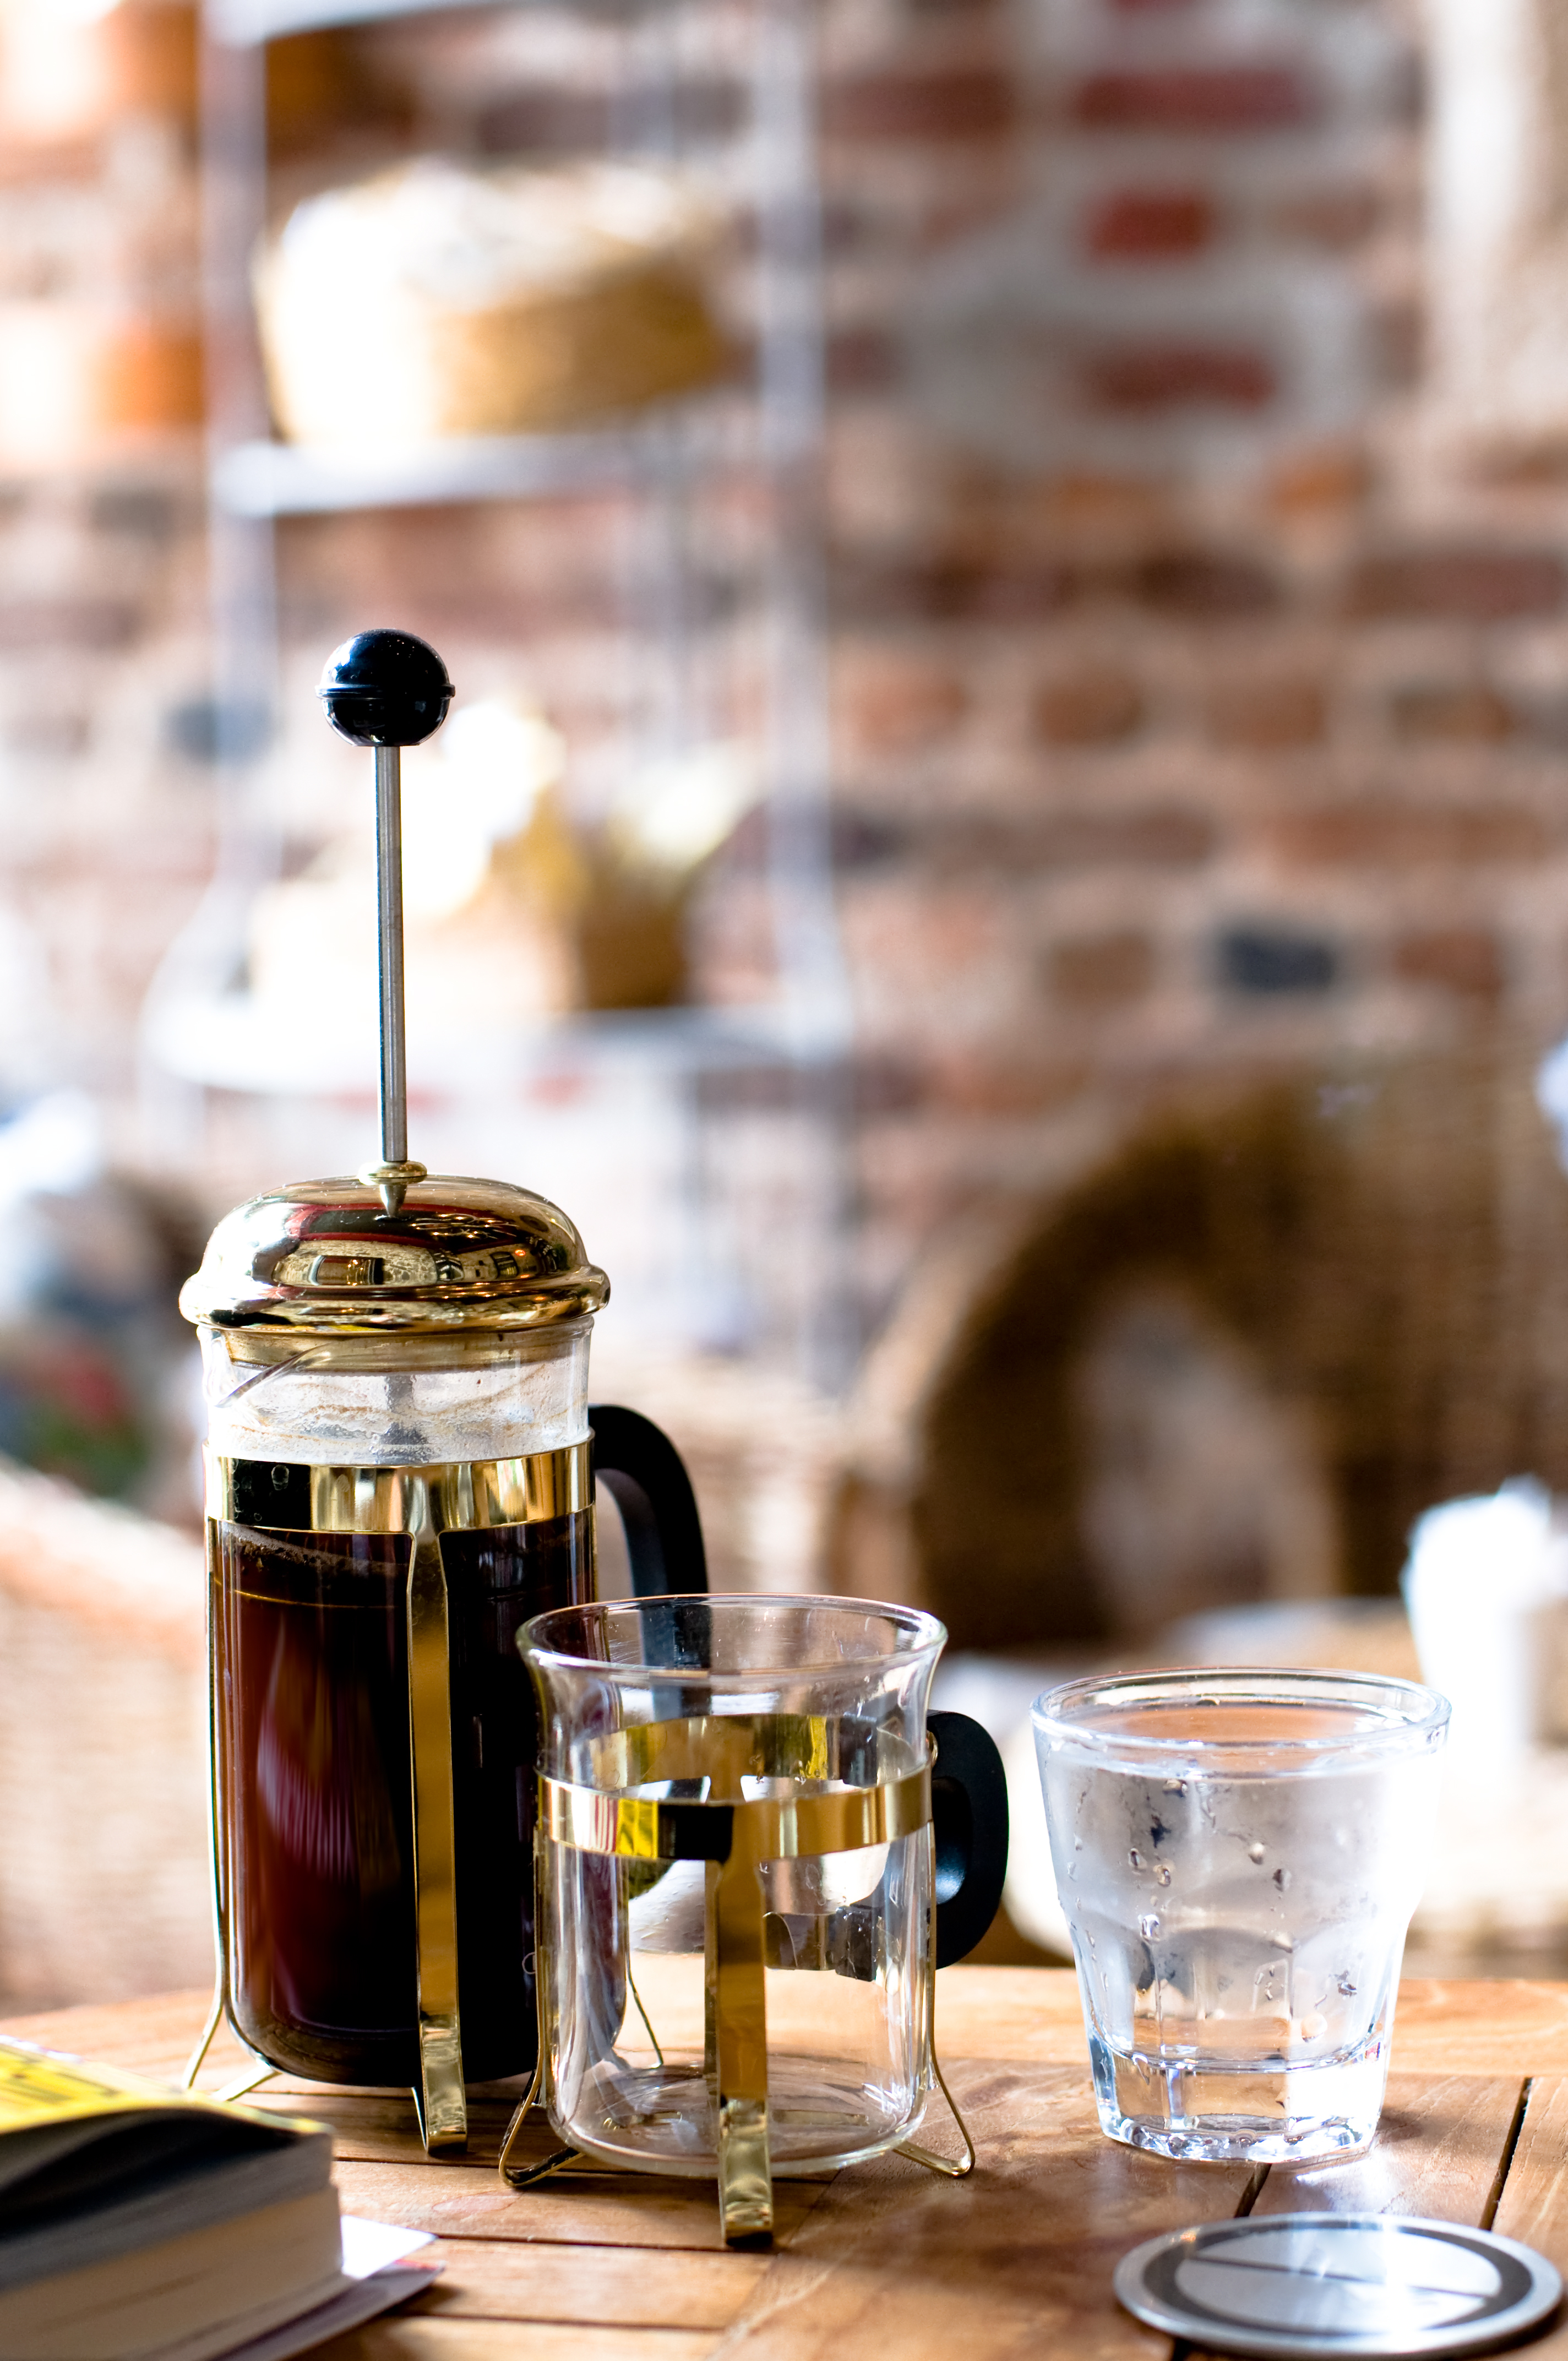 How To Make Your Own Cold Brew Coffee with a French Press